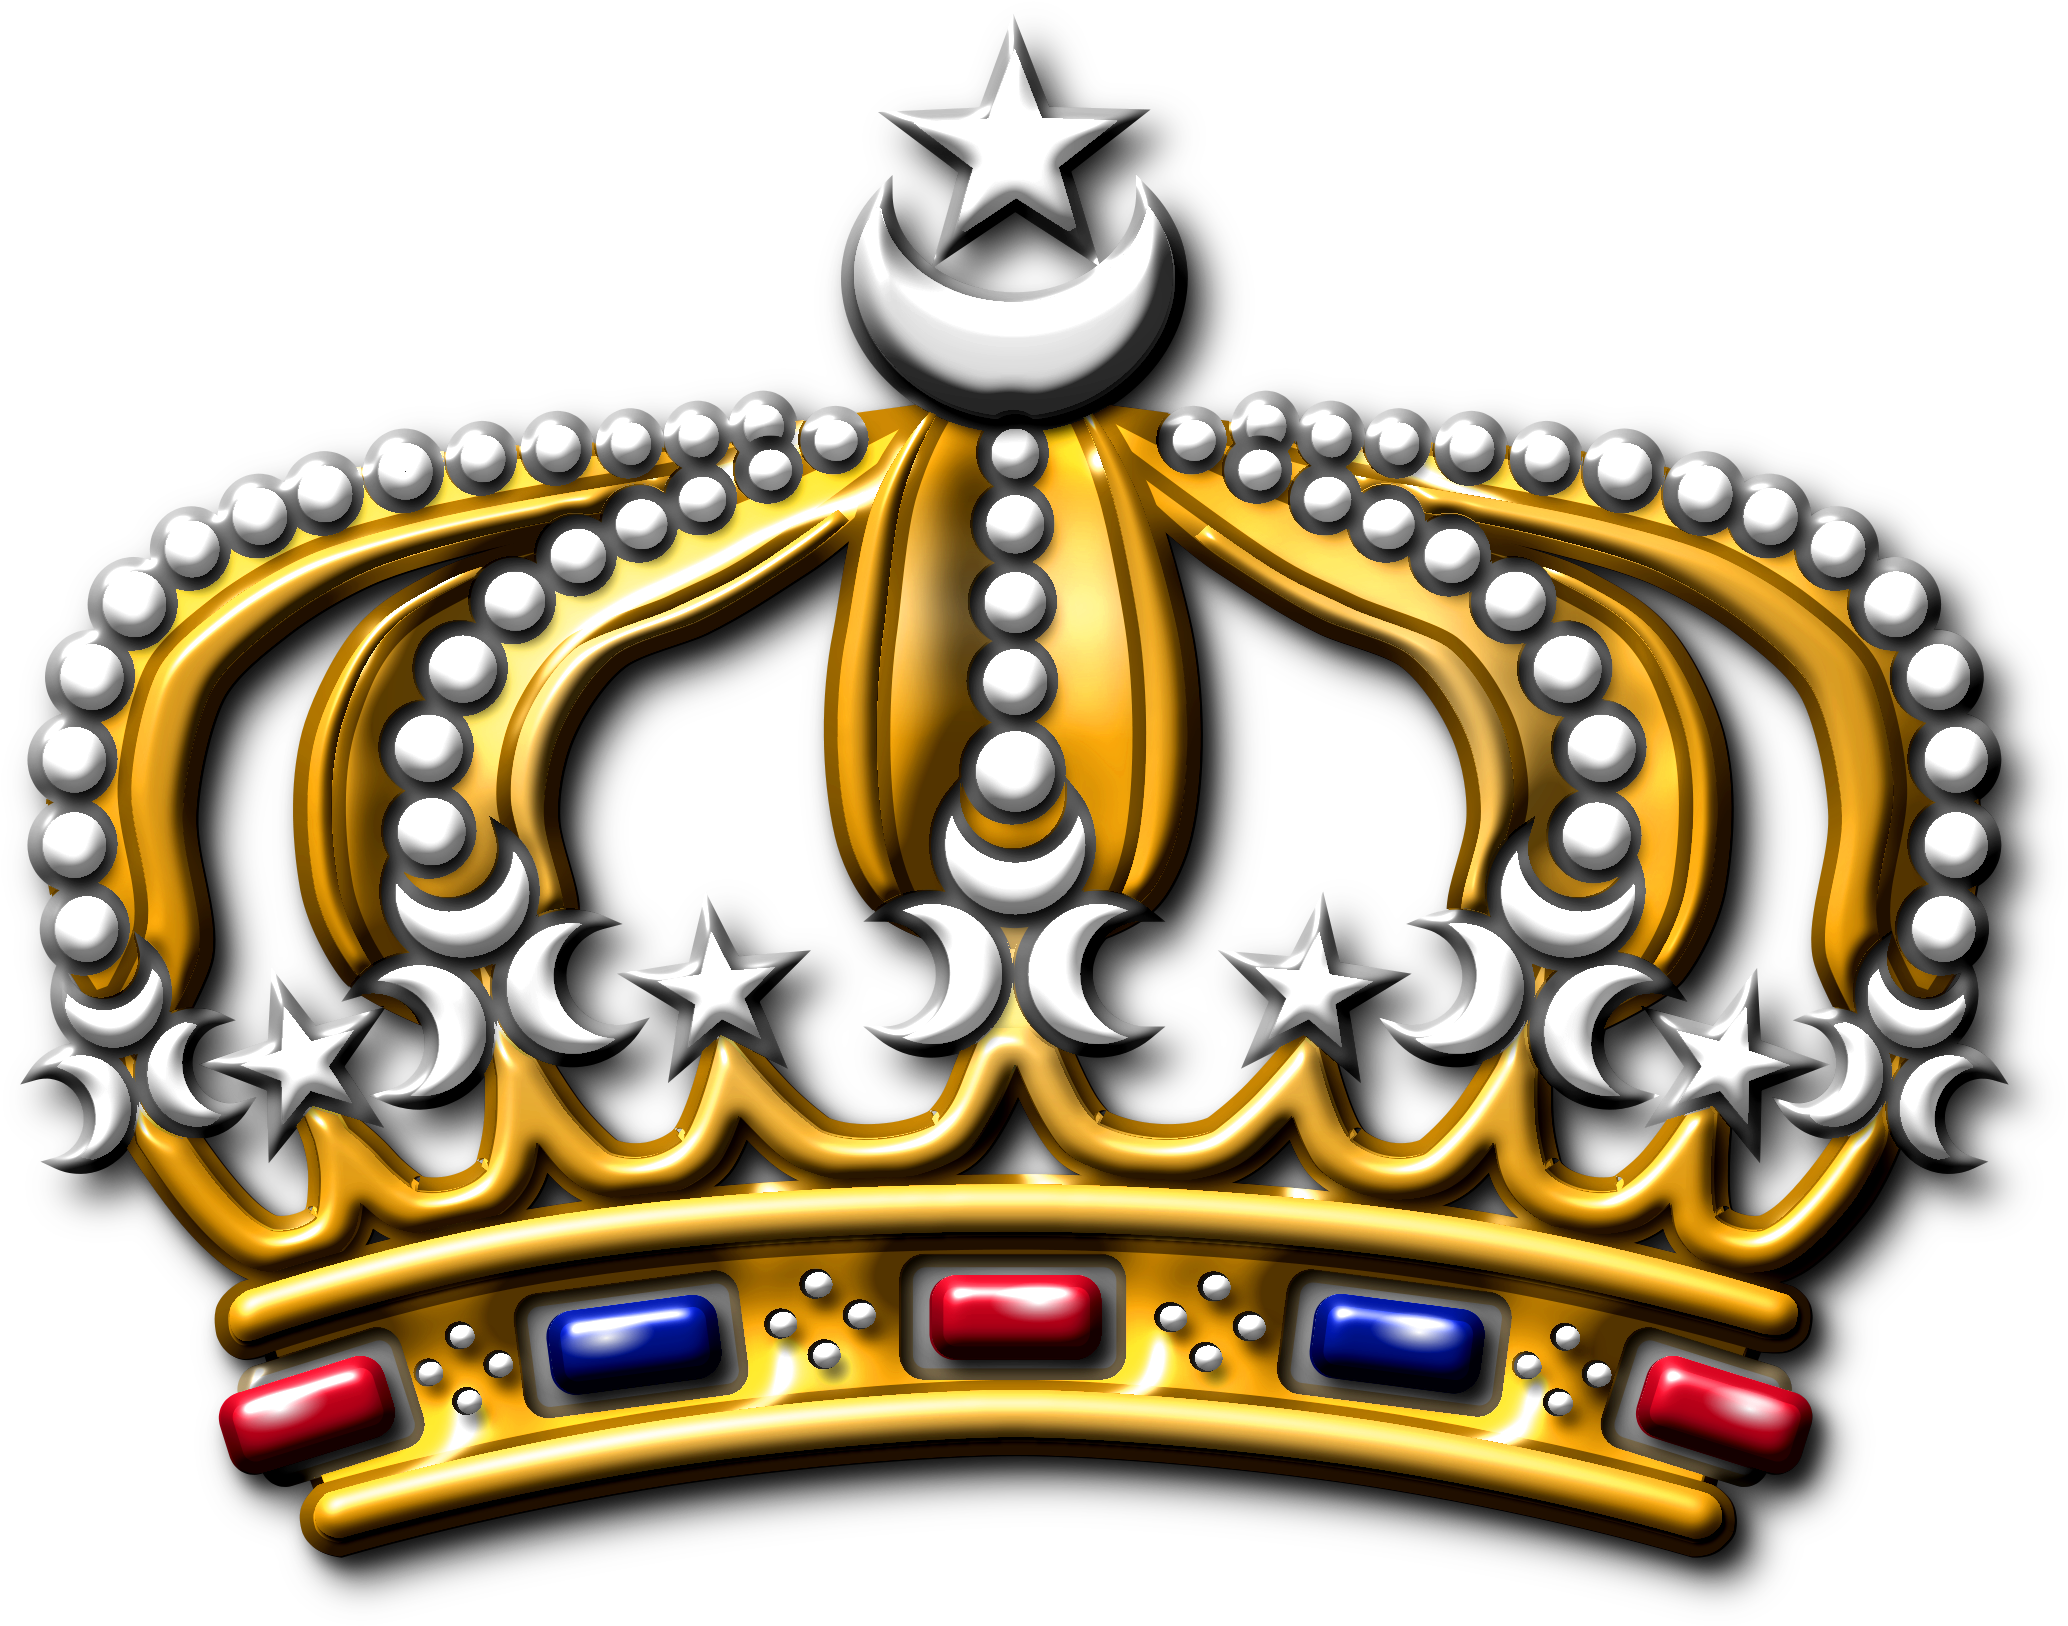 A Gold Crown With A Star And A Moon